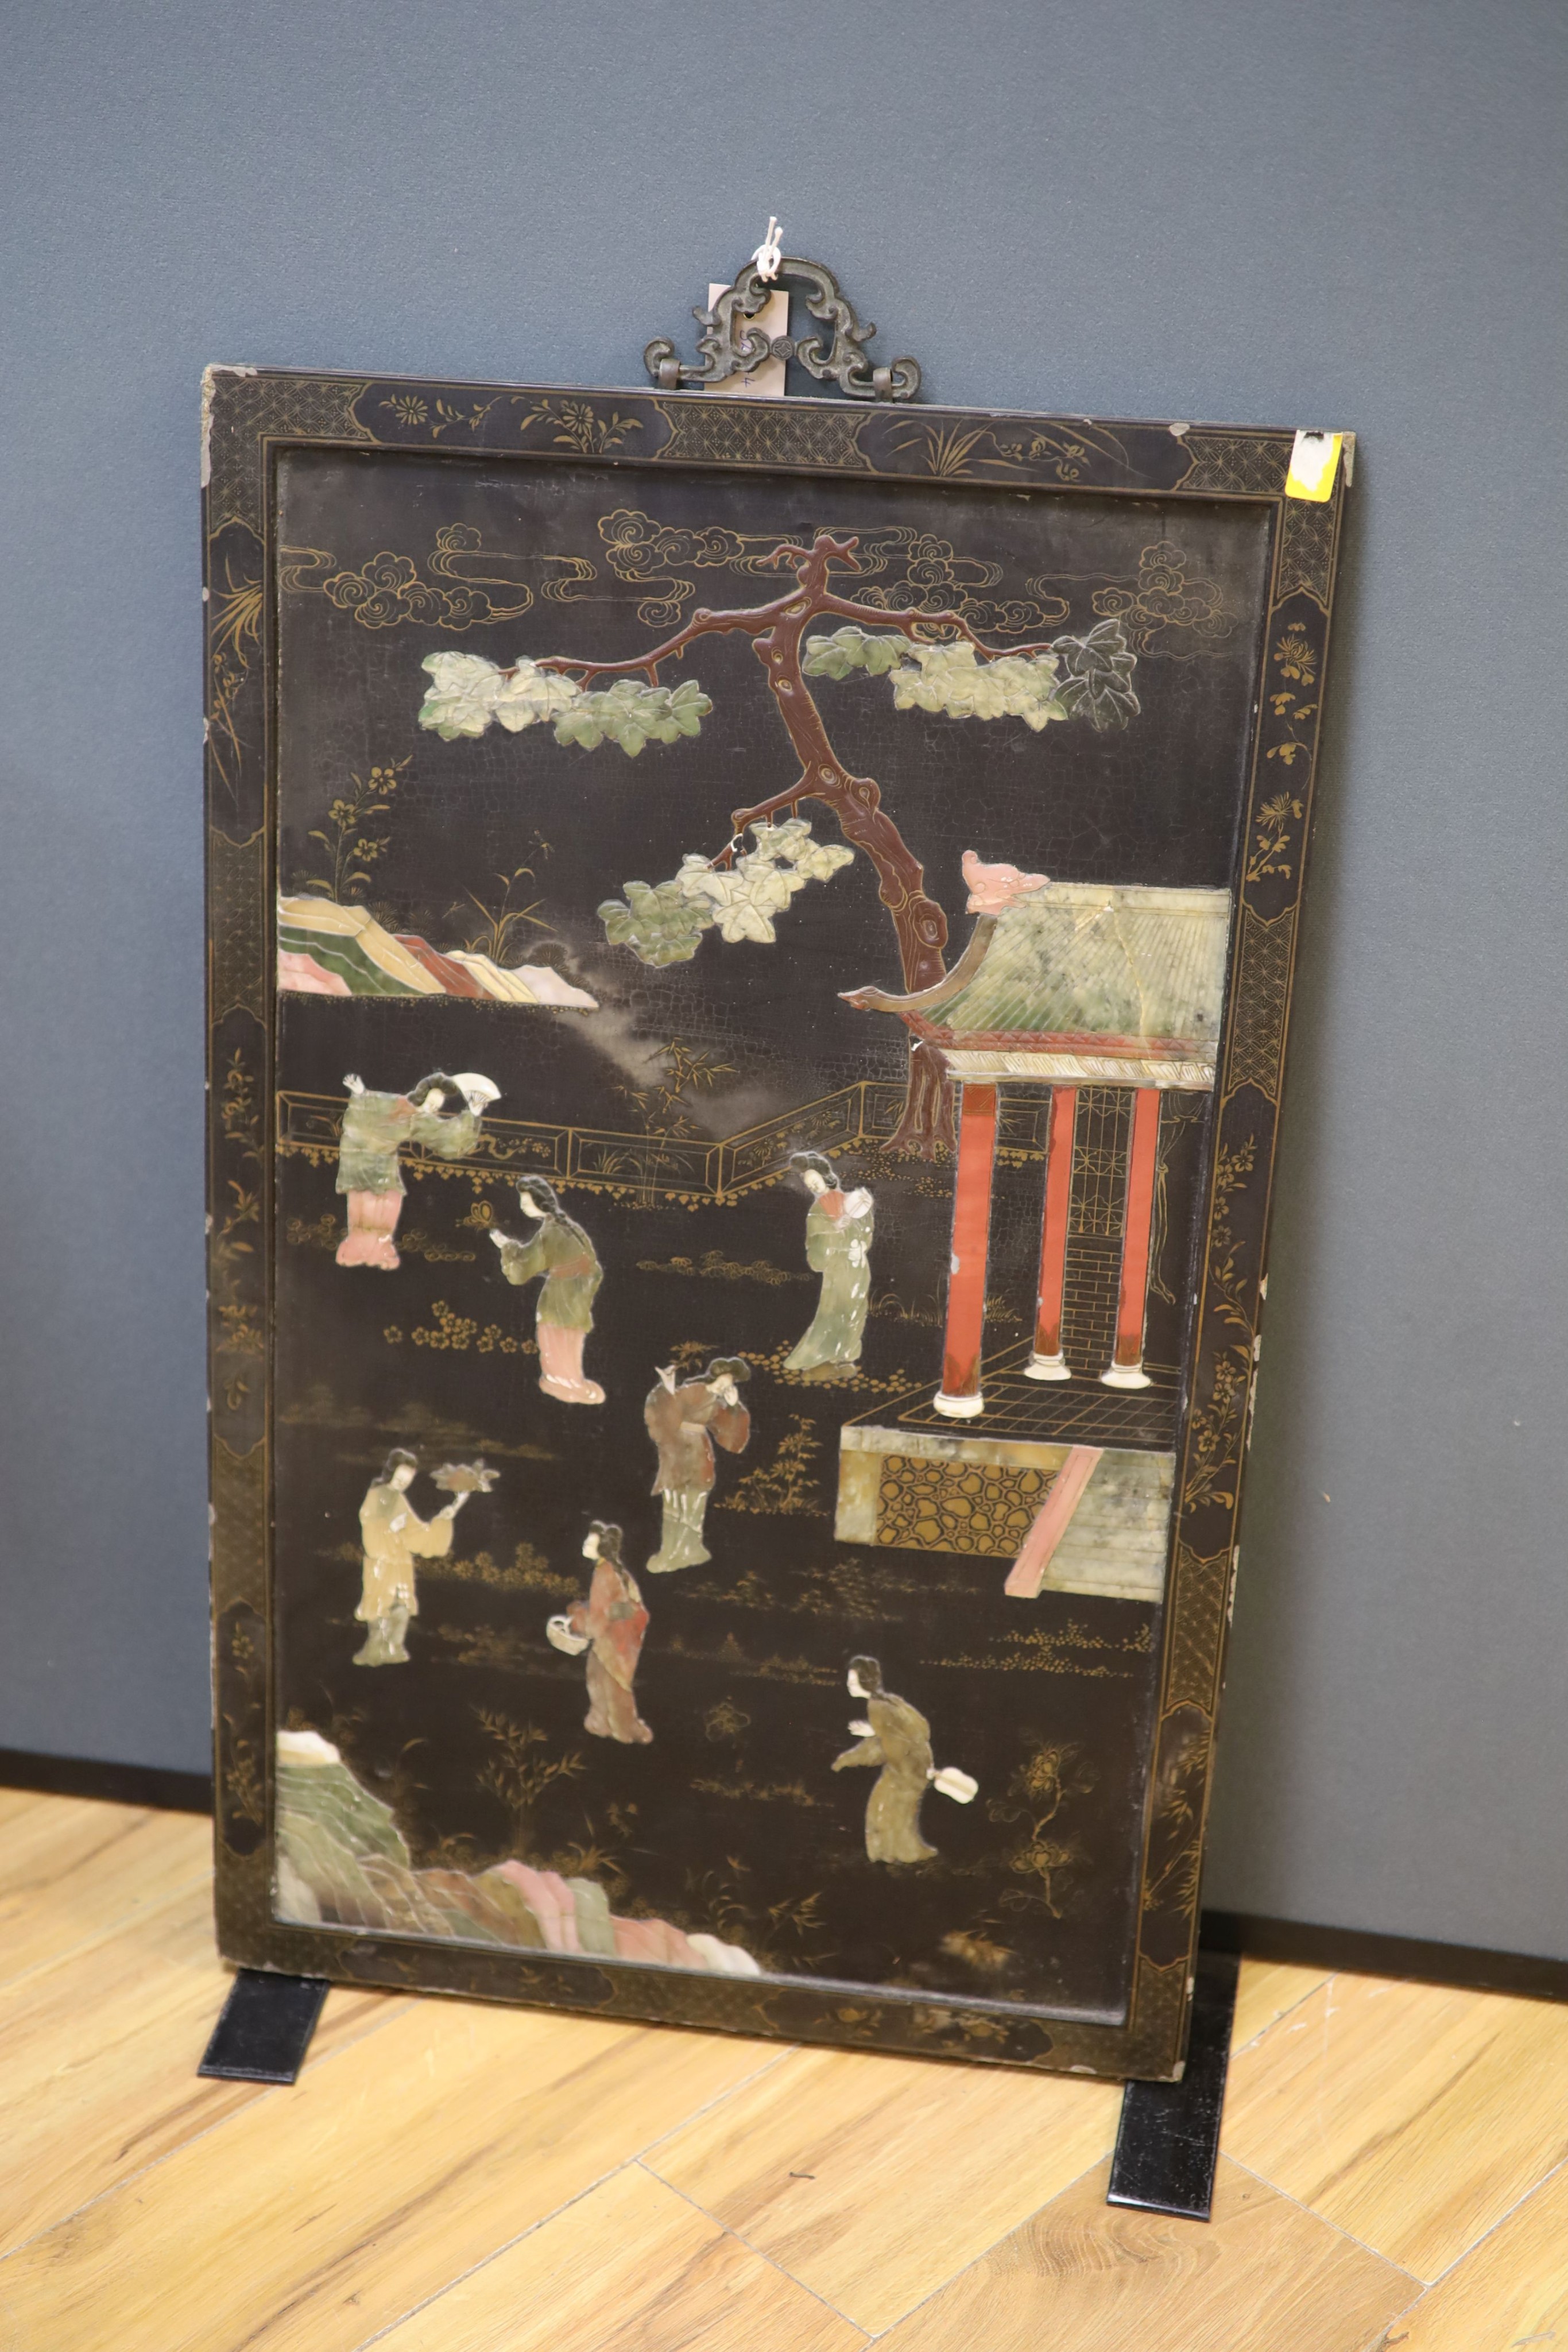 A Chinese soapstone inlaid lacquer panel, 80 1X 50 cm